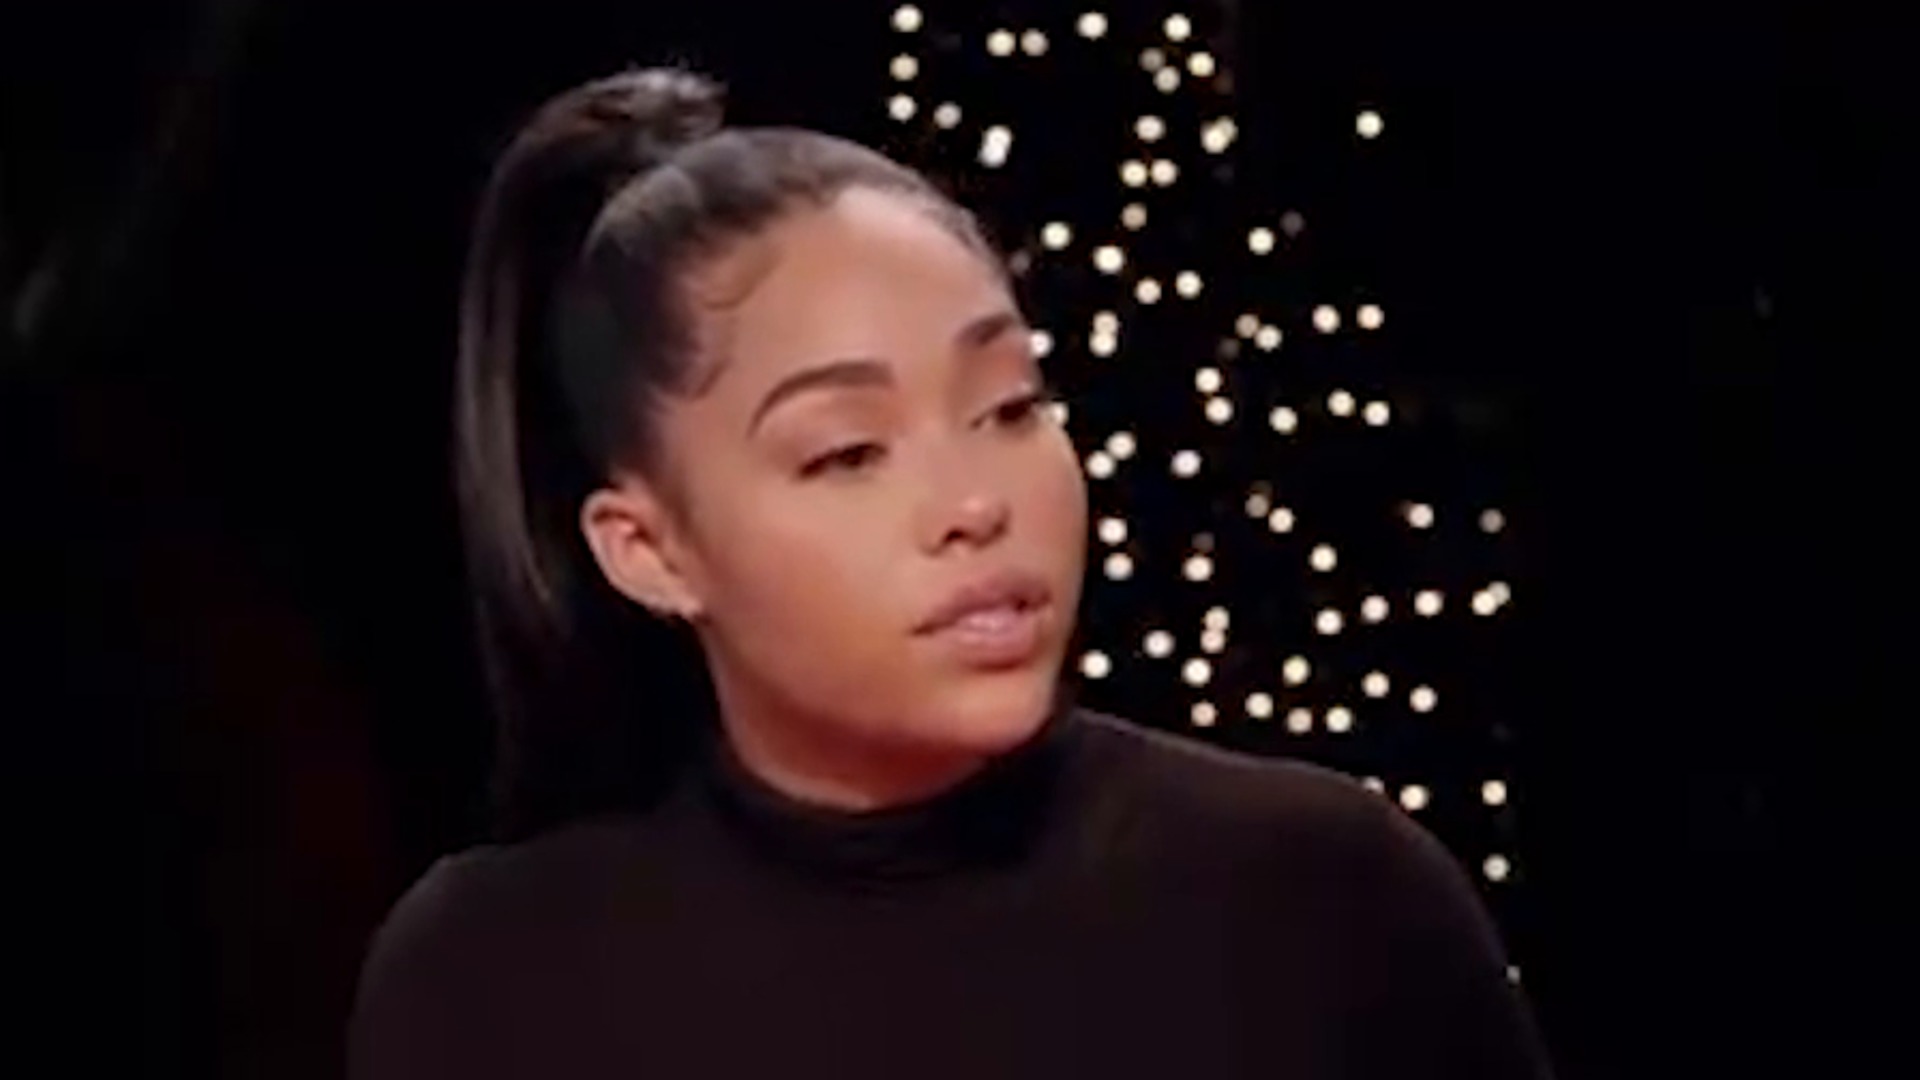 Jordyn Woods explained how Tristan Thompson first kissed her